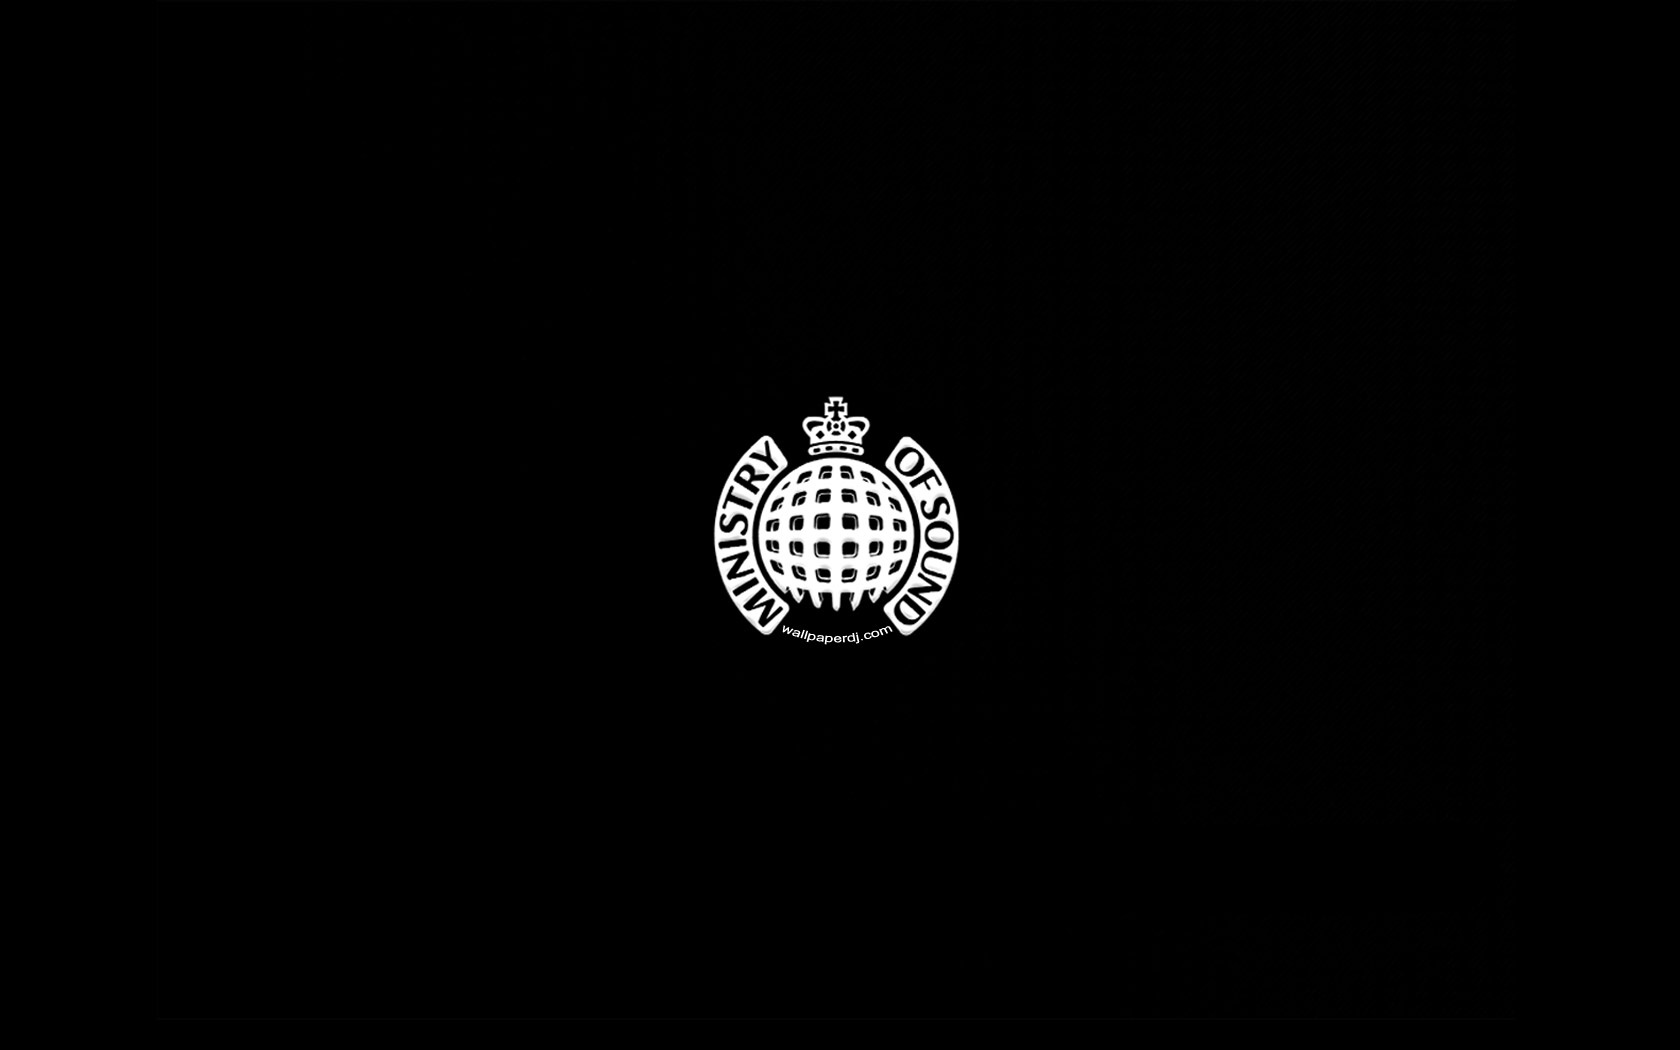 Ministry of sound logo HD and Wide Wallpapers